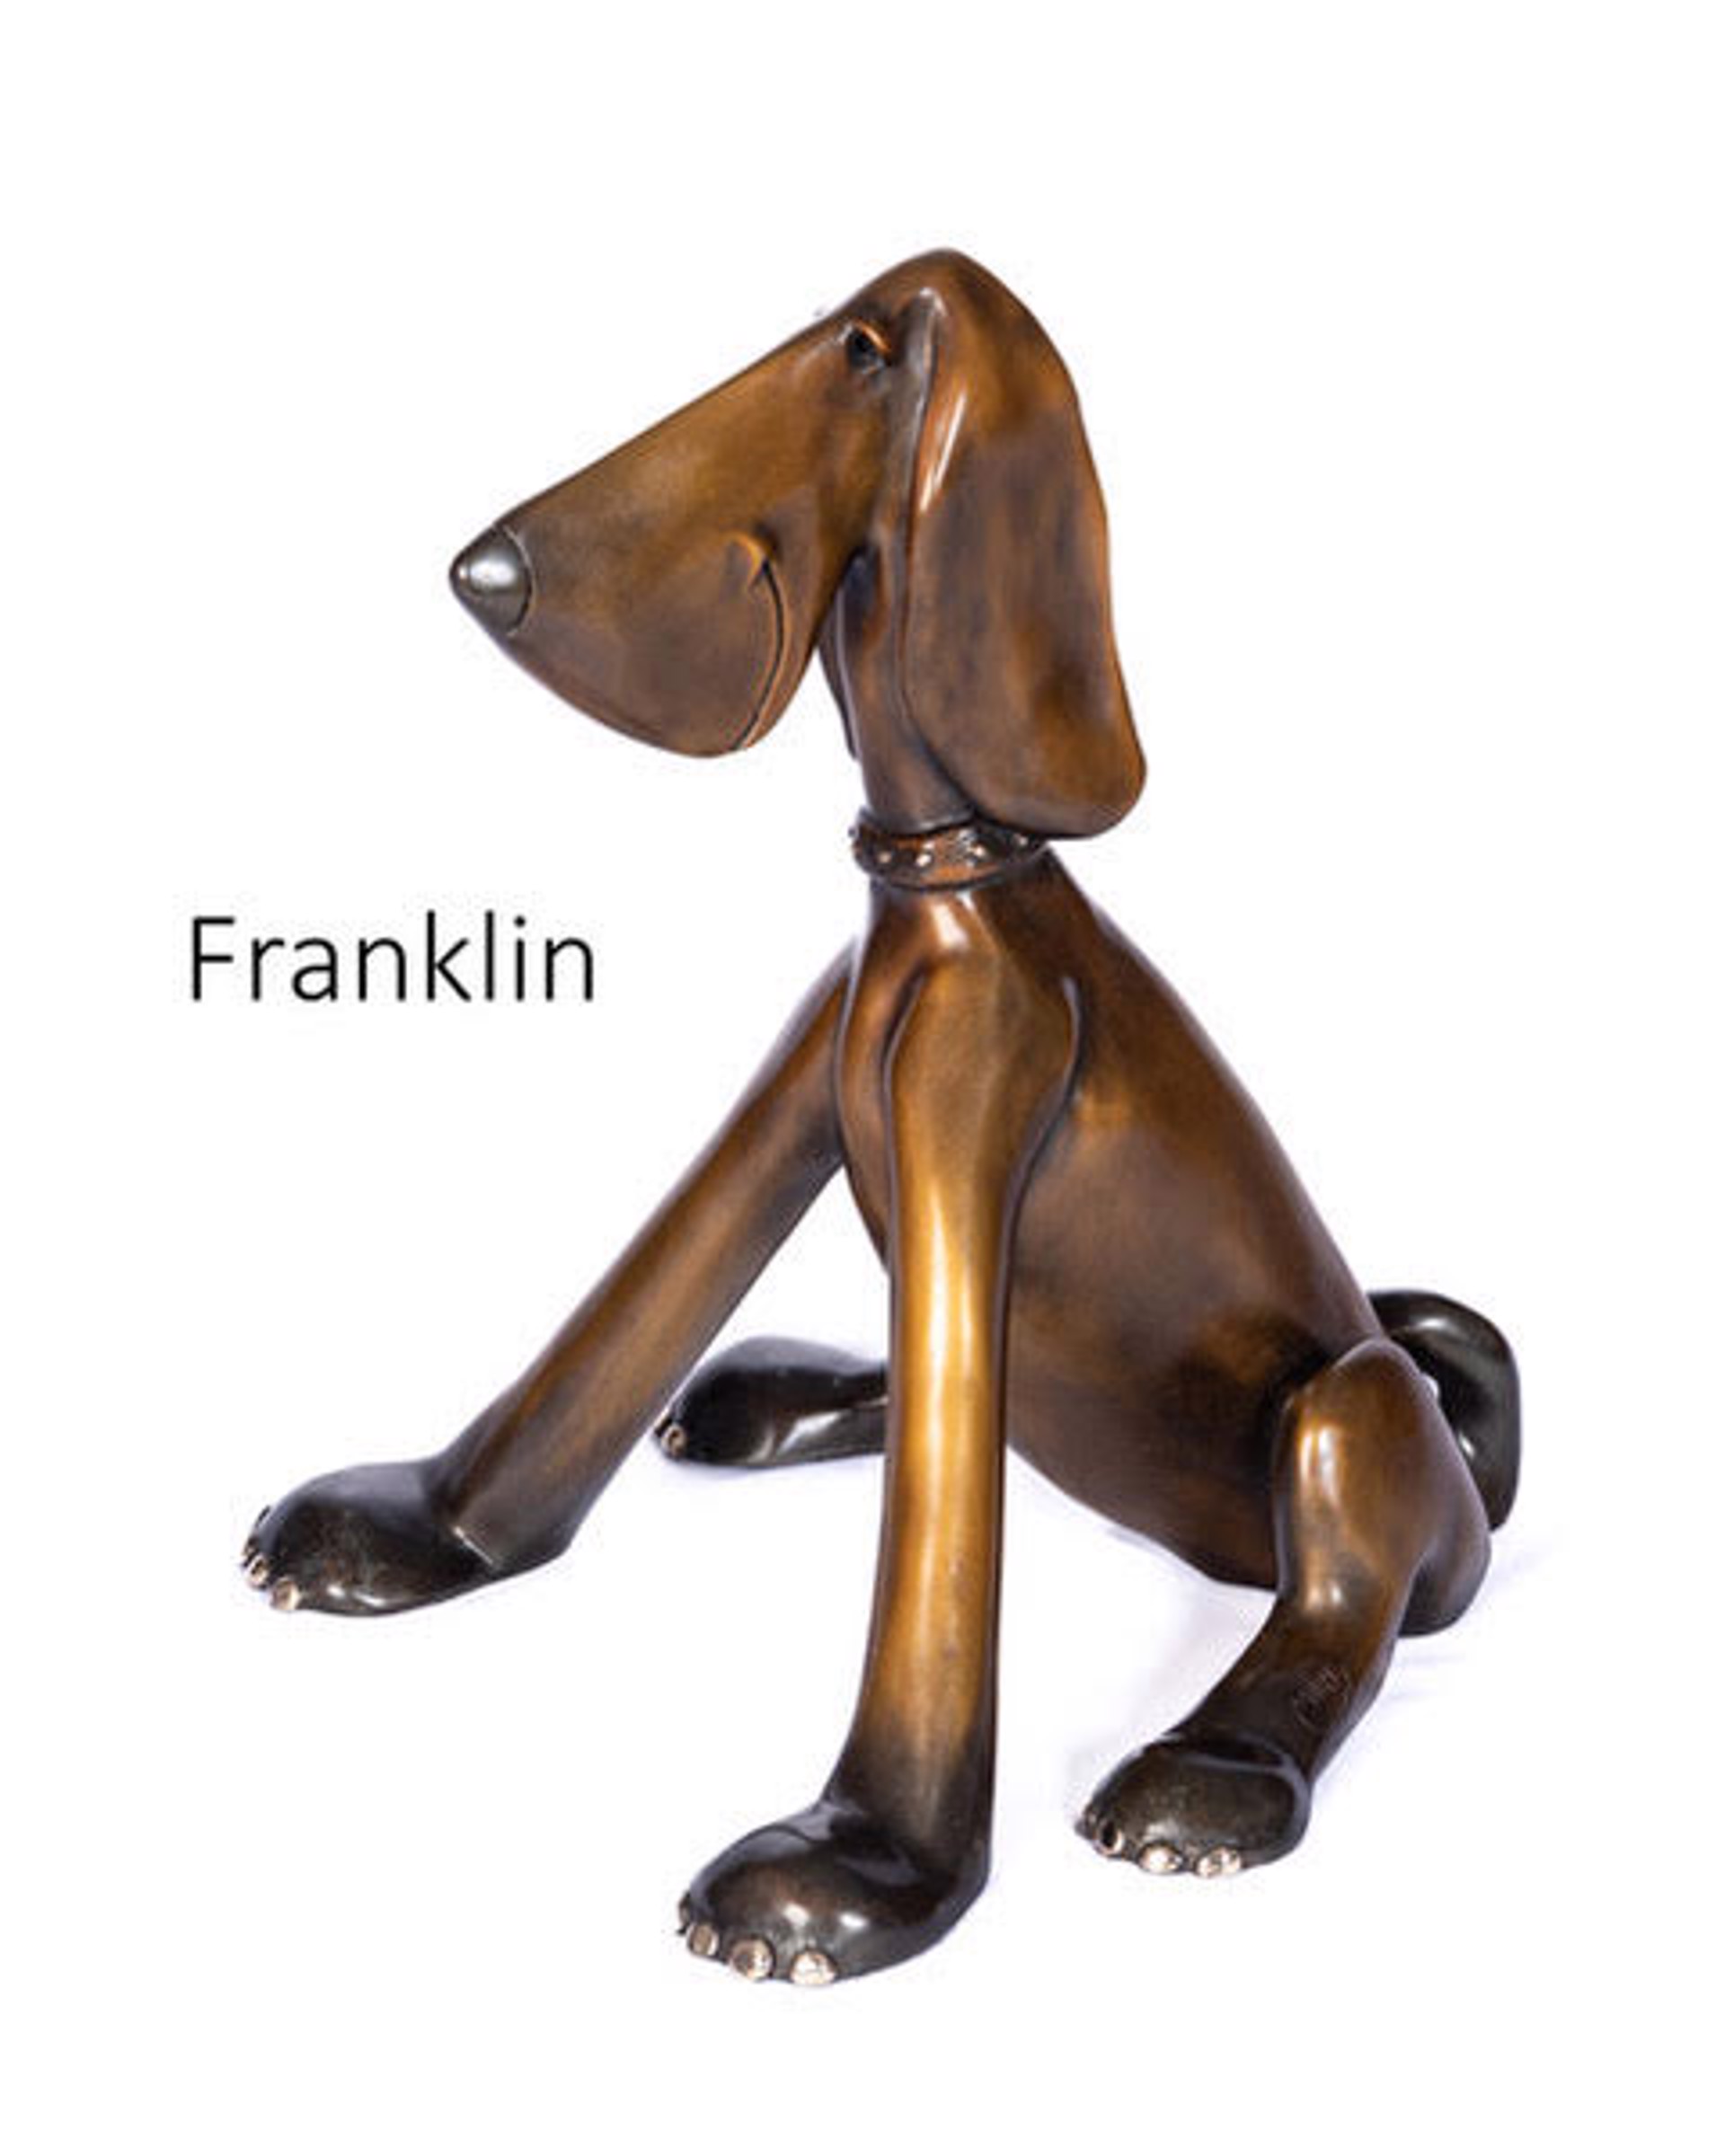 Franklin by Marty Goldstein